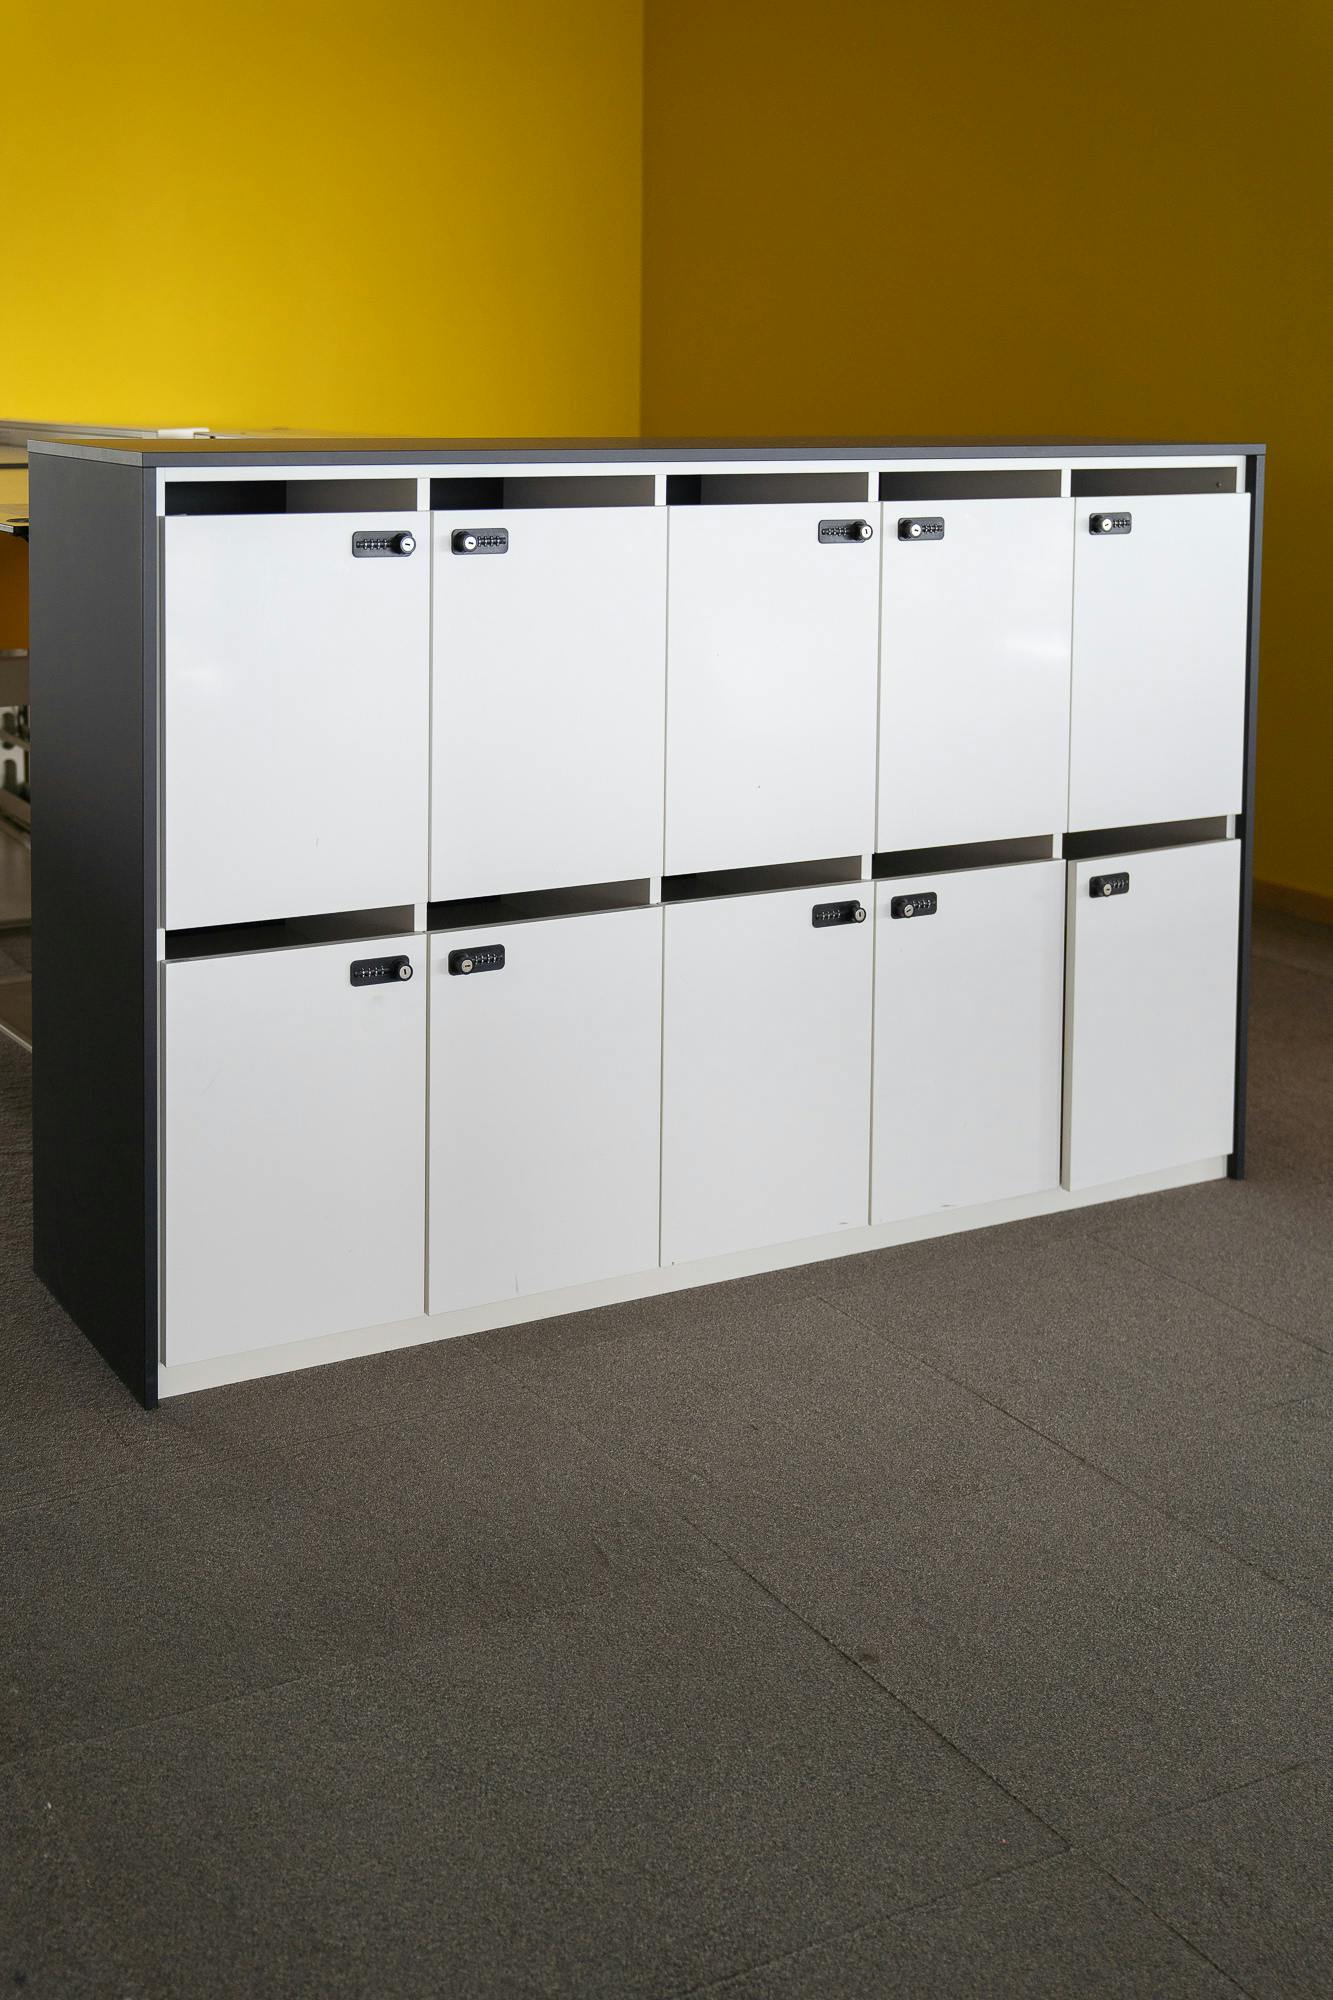 White code lockers with keys - 10 places - Second hand quality "Storage" - Relieve Furniture